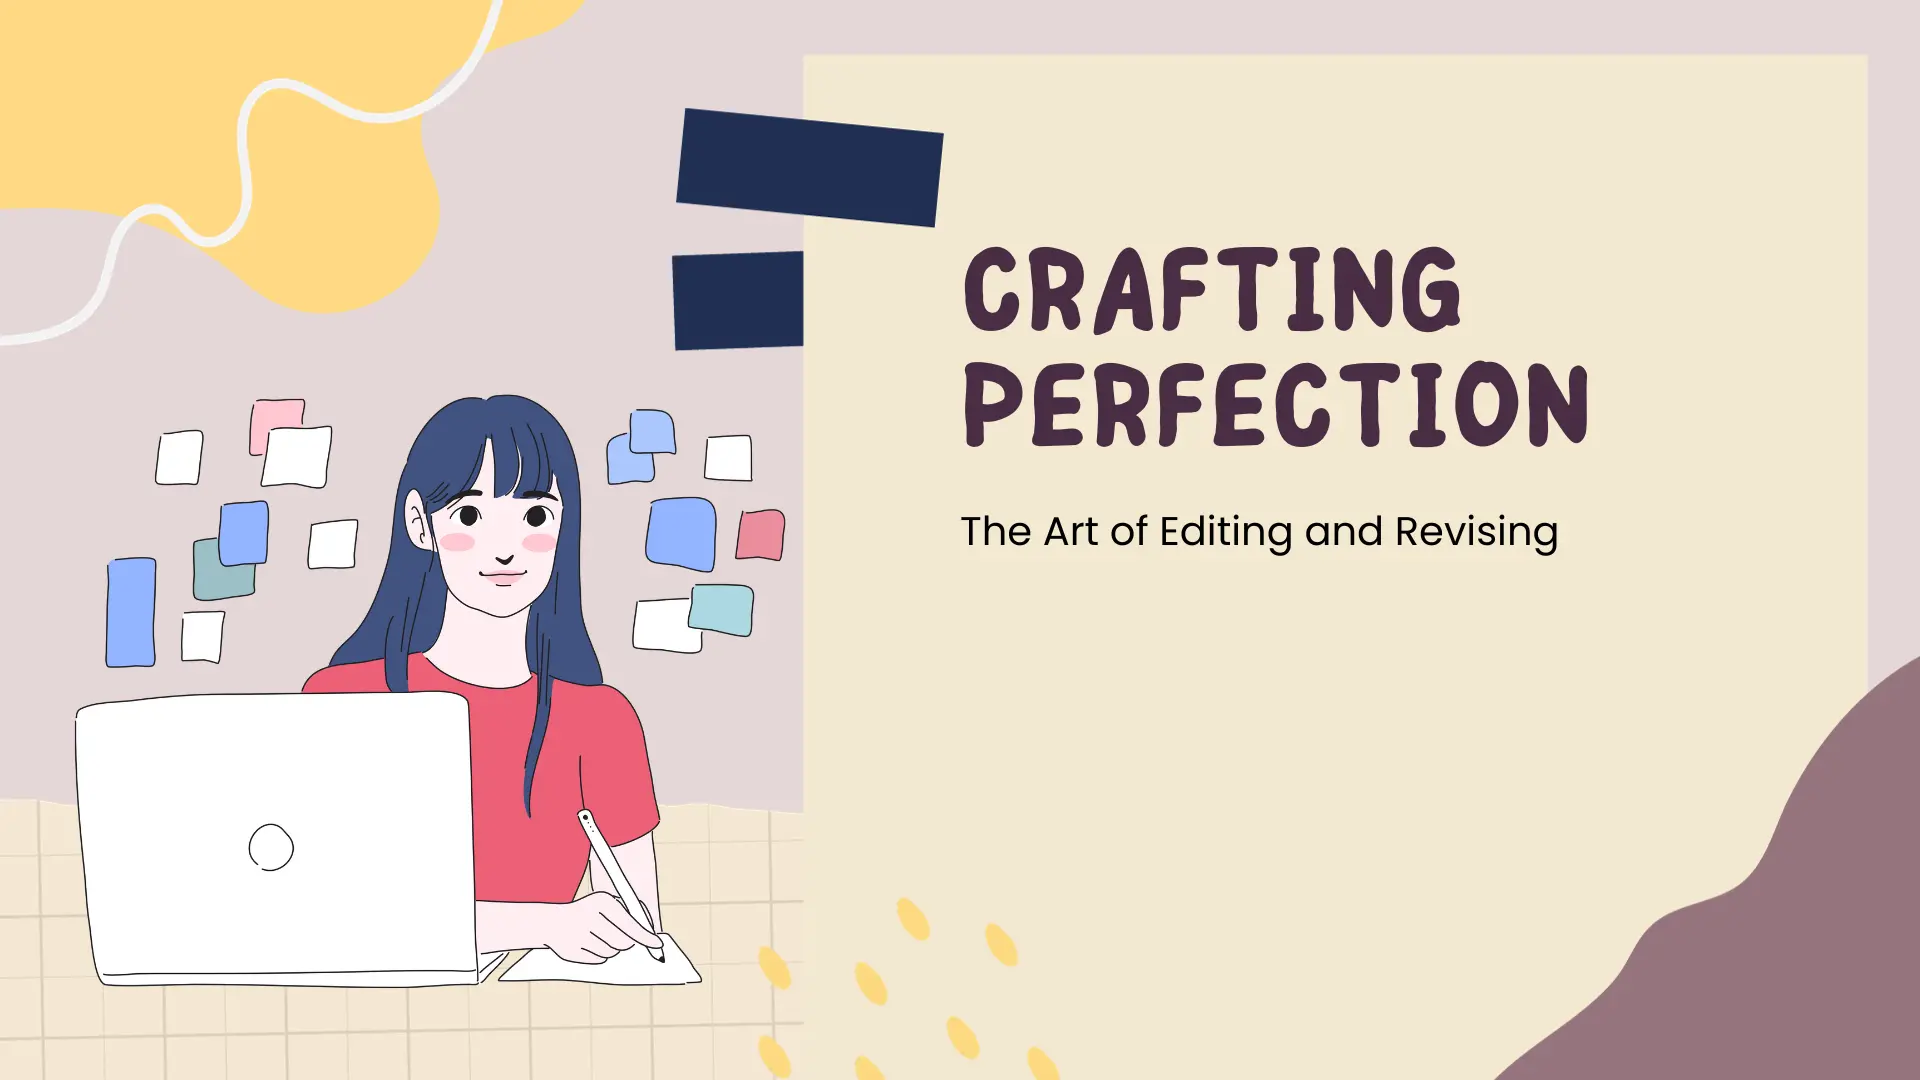 Crafting Perfection: The Art of Editing and Revising